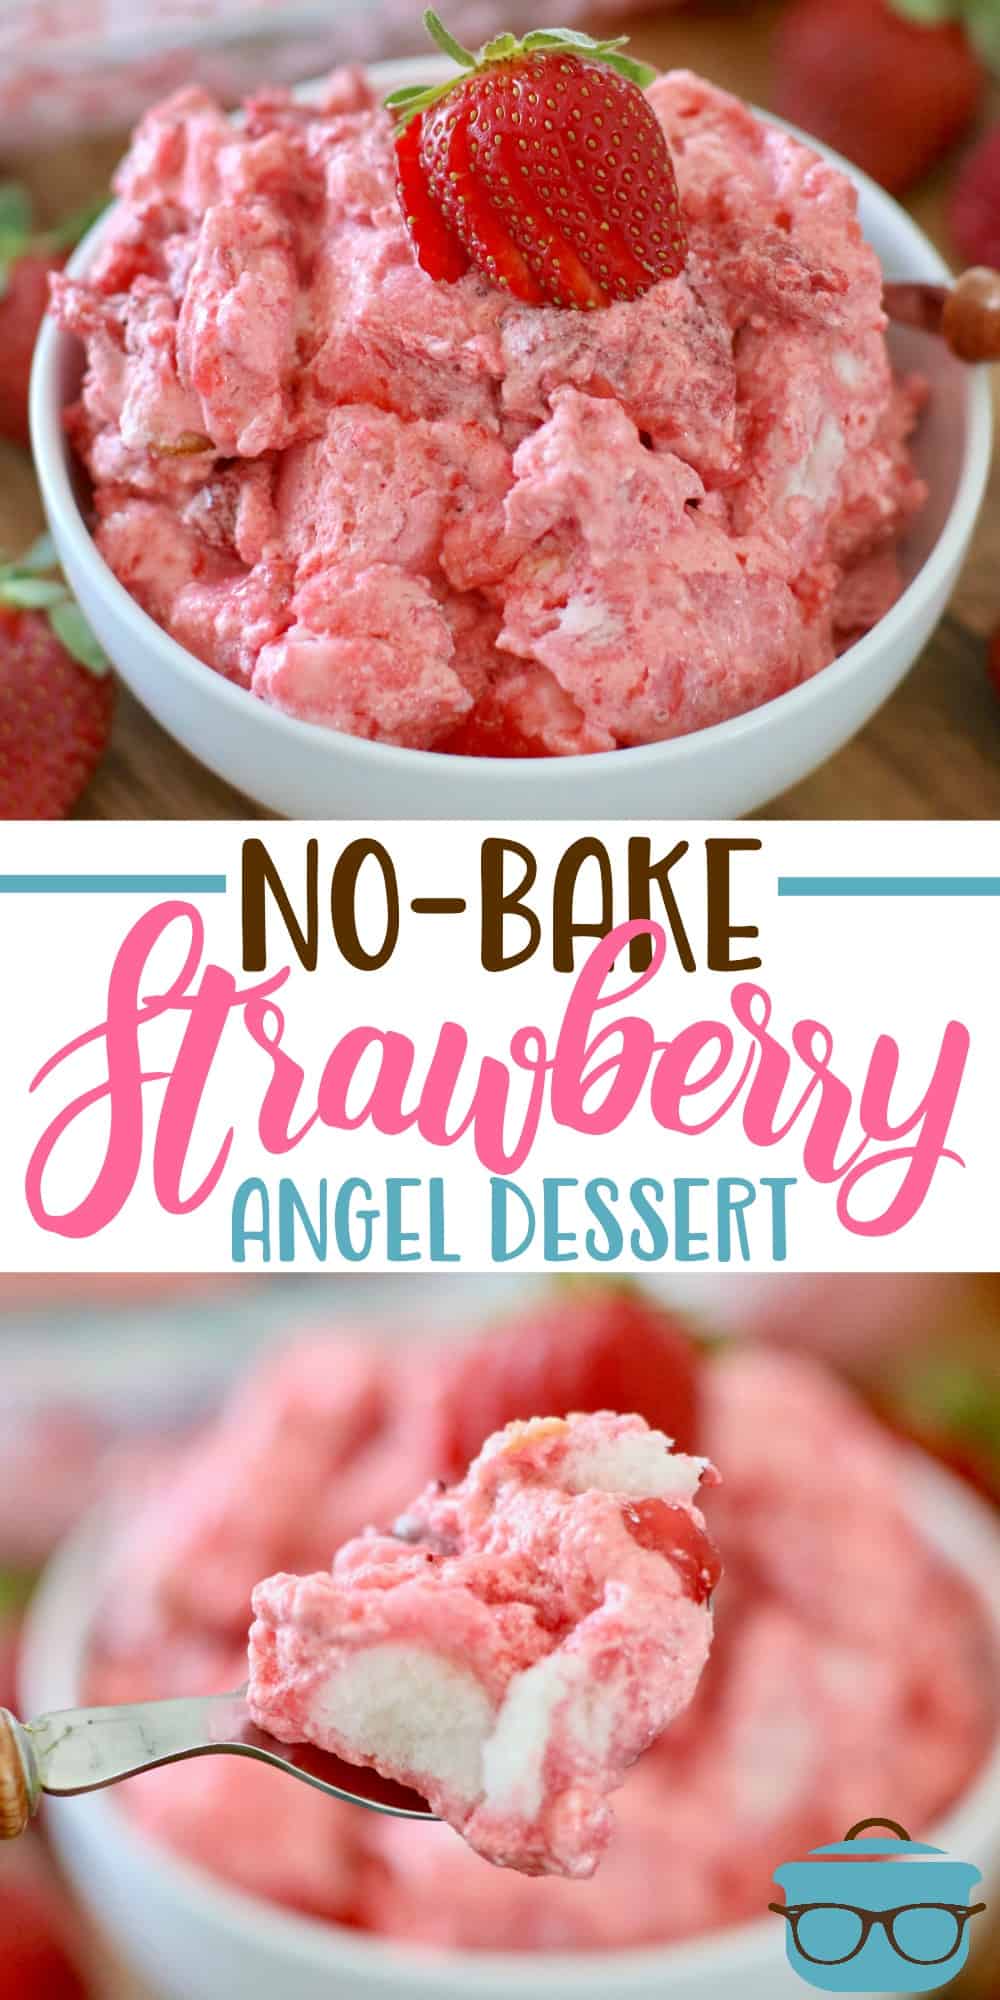 NO-BAKE STRAWBERRY ANGEL DESSERT | The Country Cook